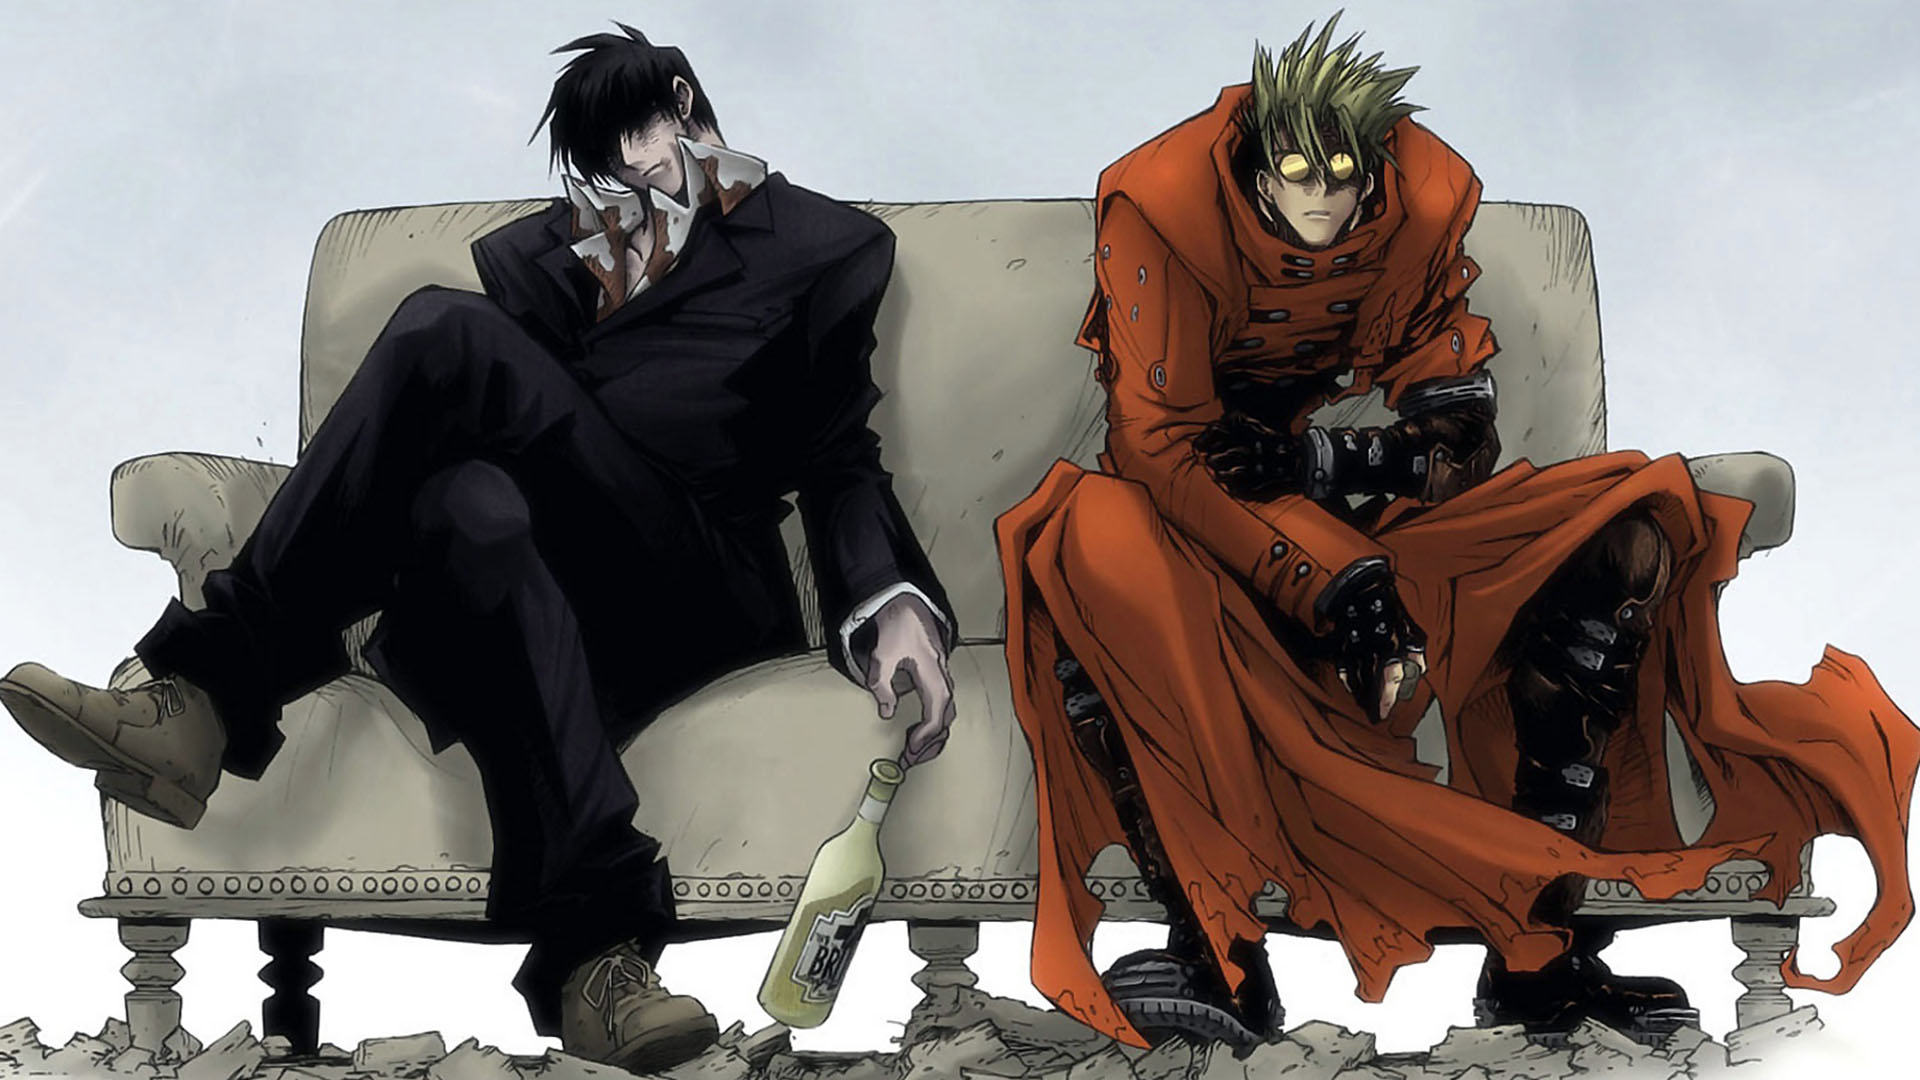 Trigun Series Watch Order - Anime and Gaming Guides & Information